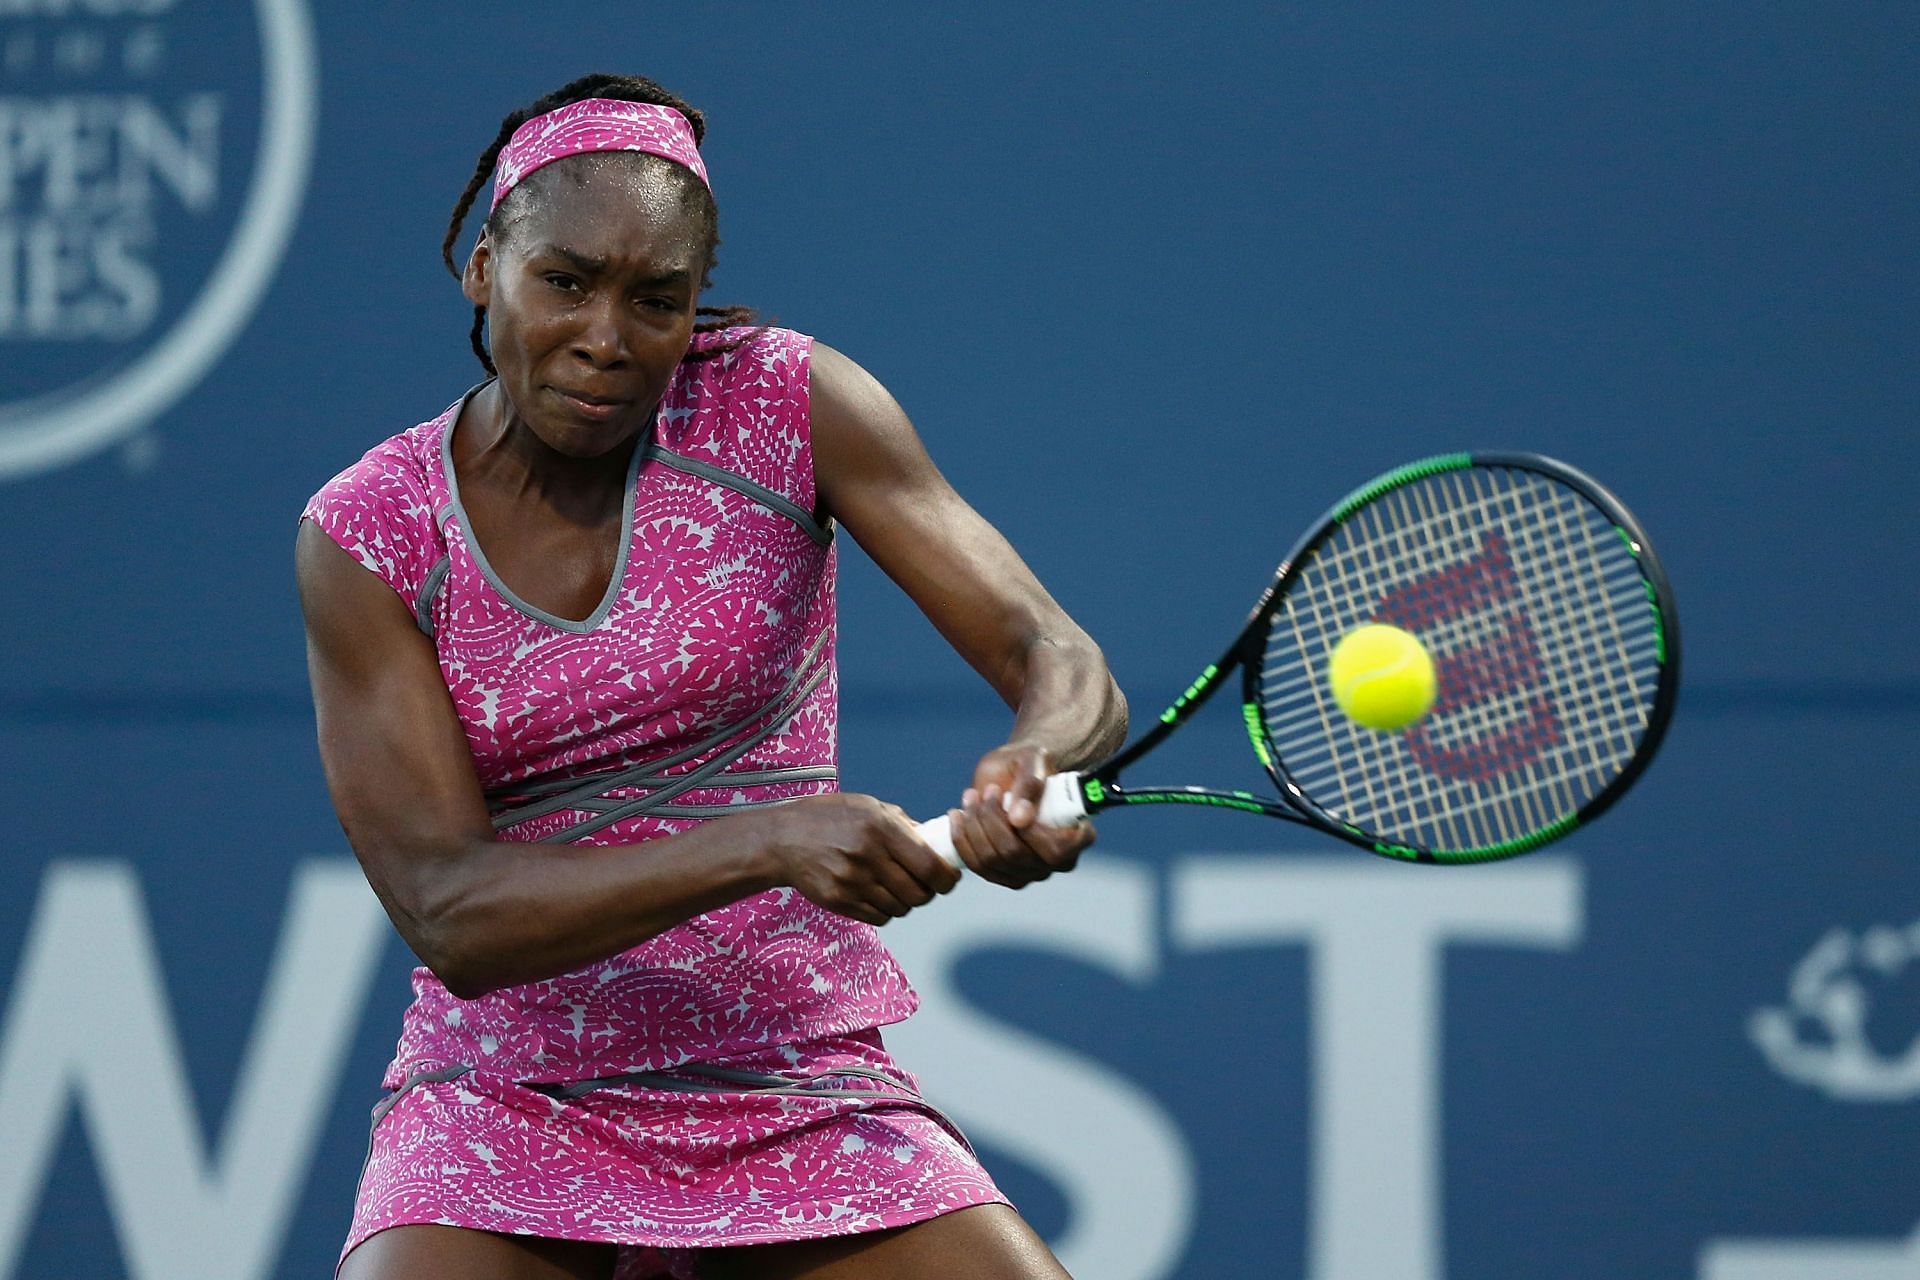 Venus Williams has won the Bank of the West Classic twice in her career